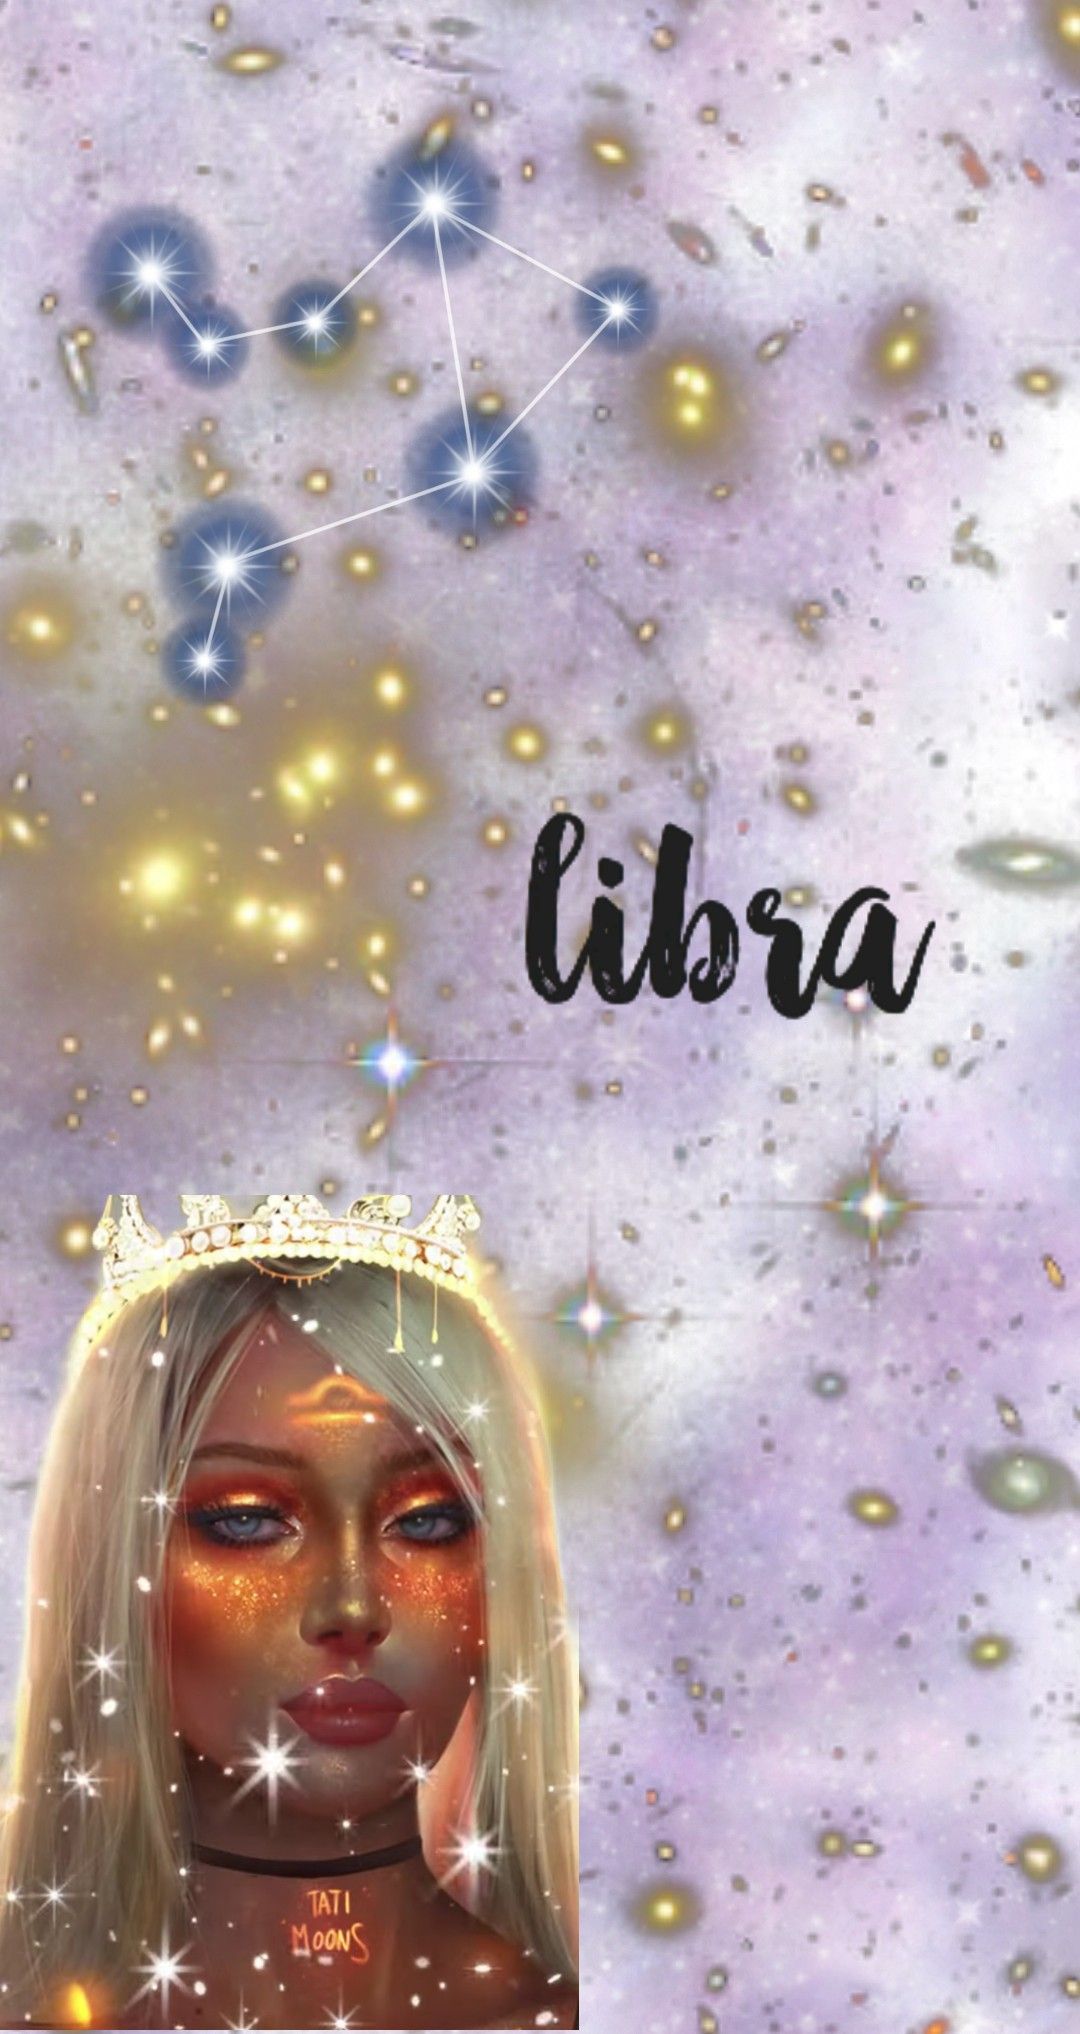 A girl with long hair and the word libra - Libra